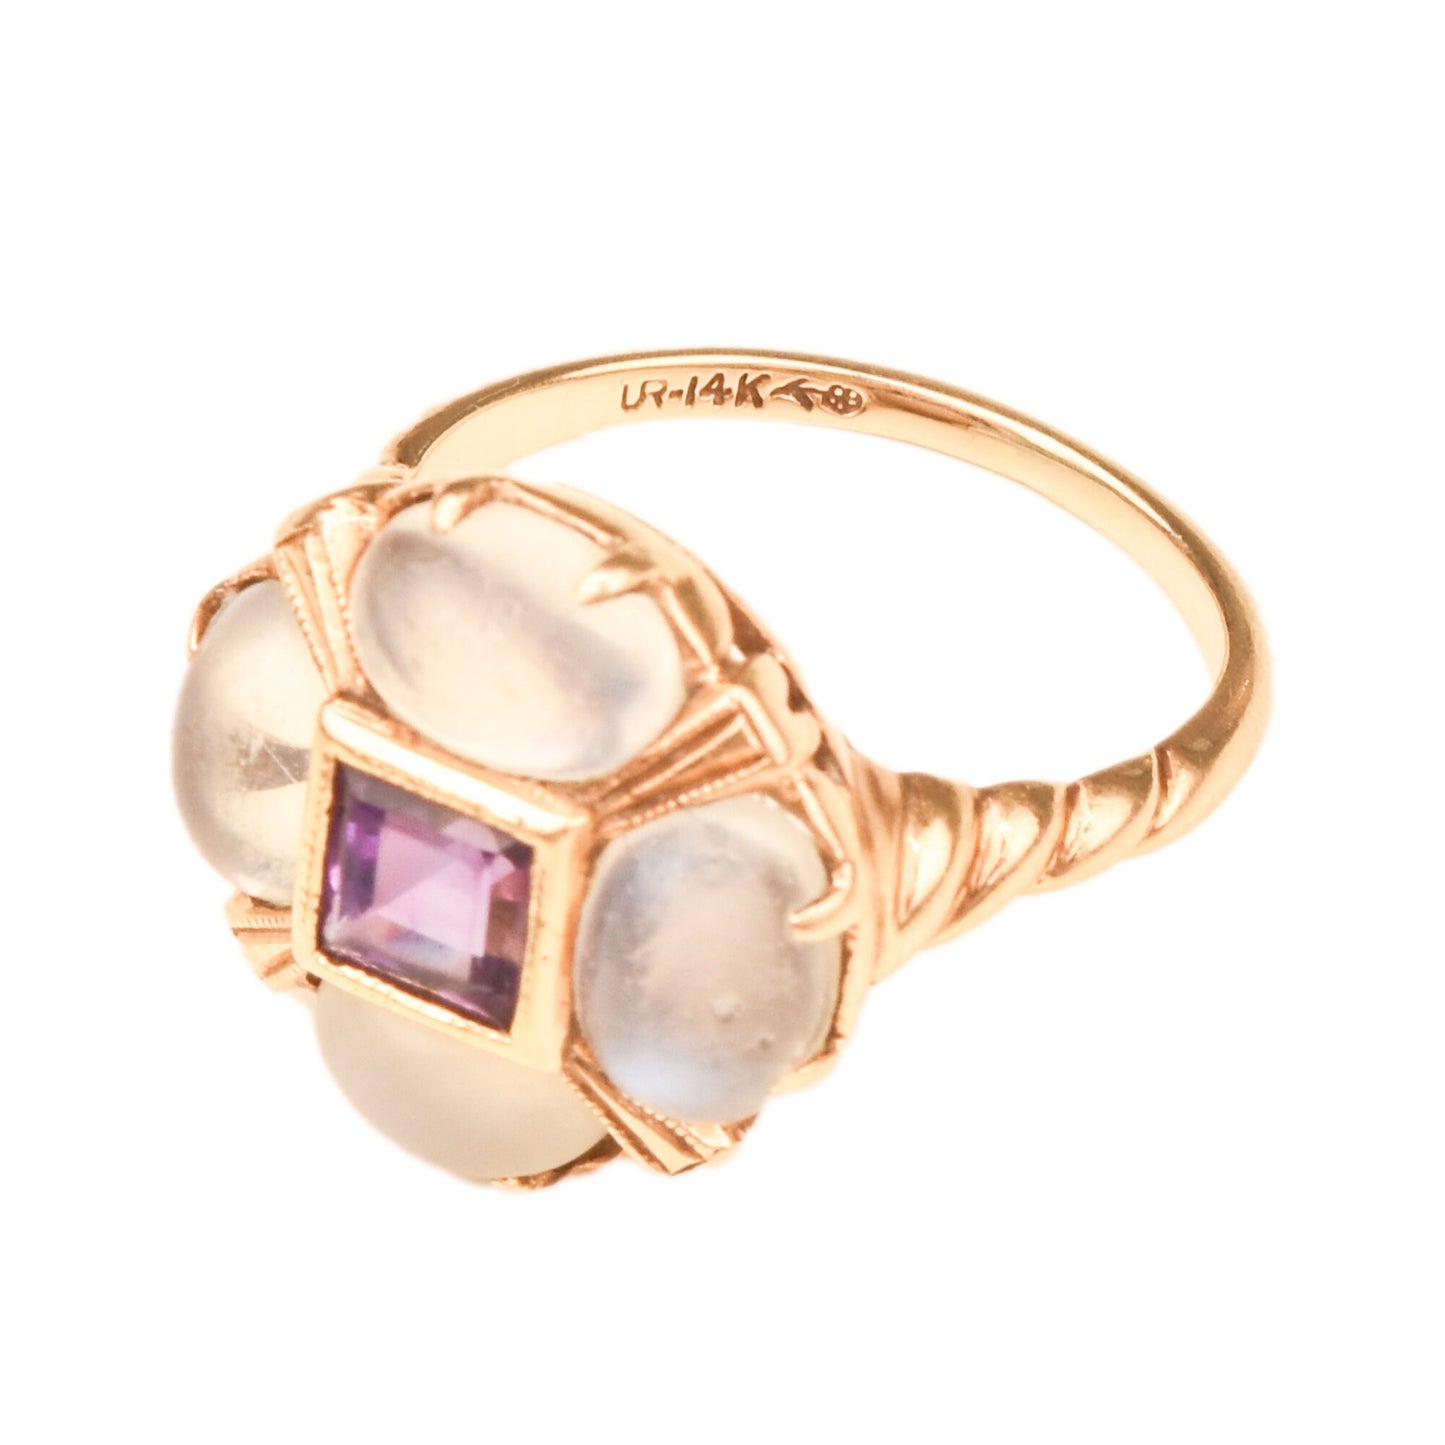 Moonstone Amethyst Flower Ring In 14K Yellow Gold, Estate Jewelry, Size 5 1/4 US